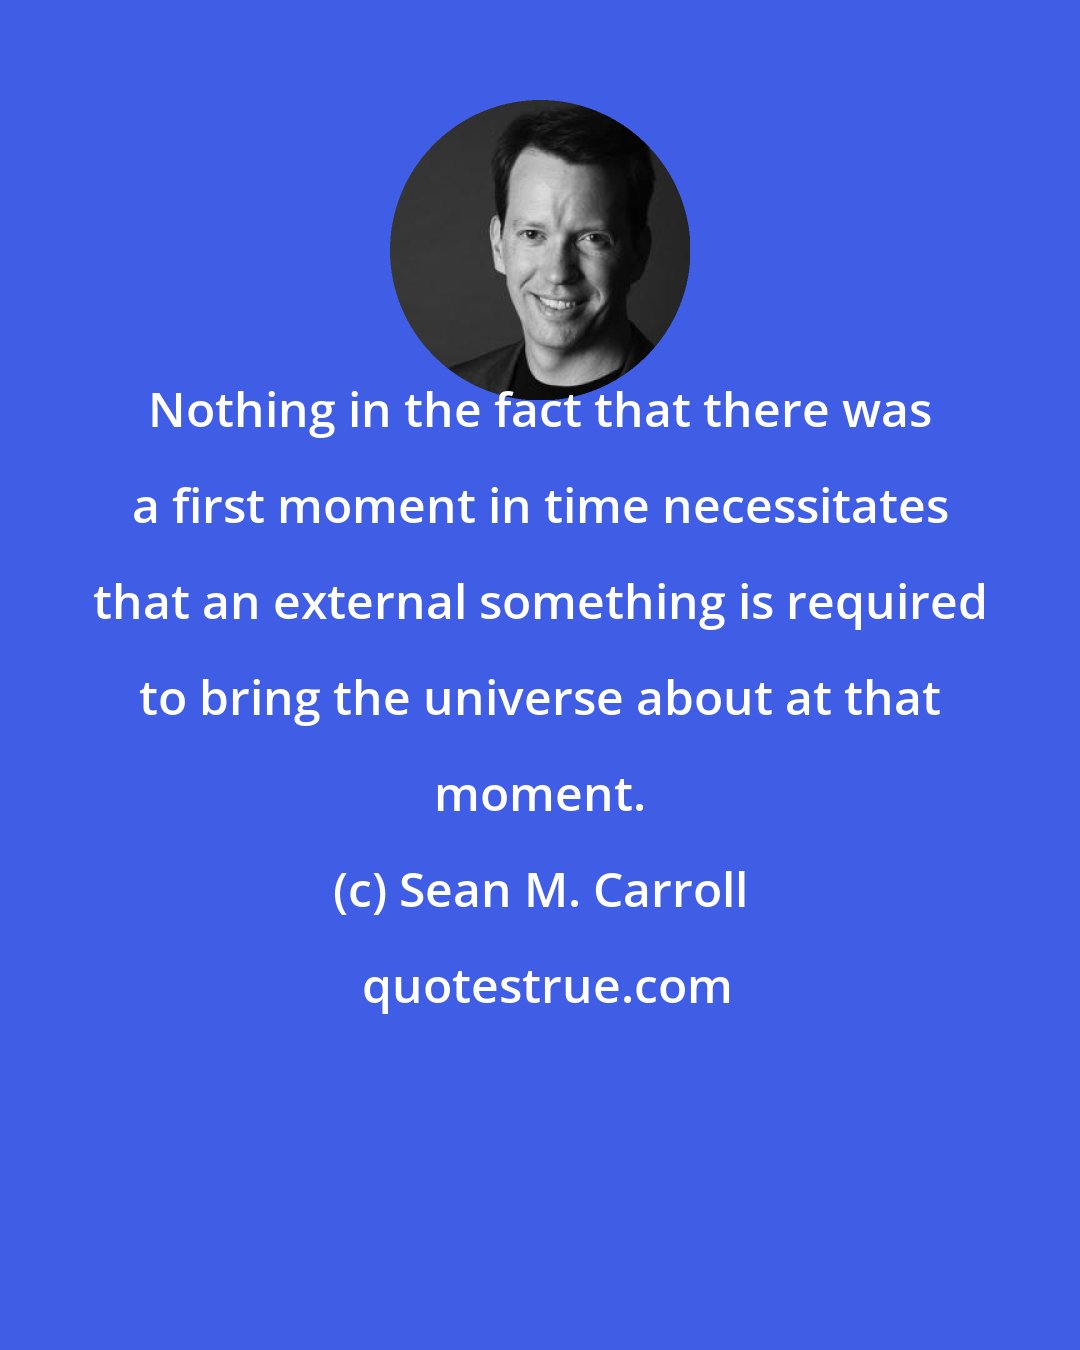 Sean M. Carroll: Nothing in the fact that there was a first moment in time necessitates that an external something is required to bring the universe about at that moment.